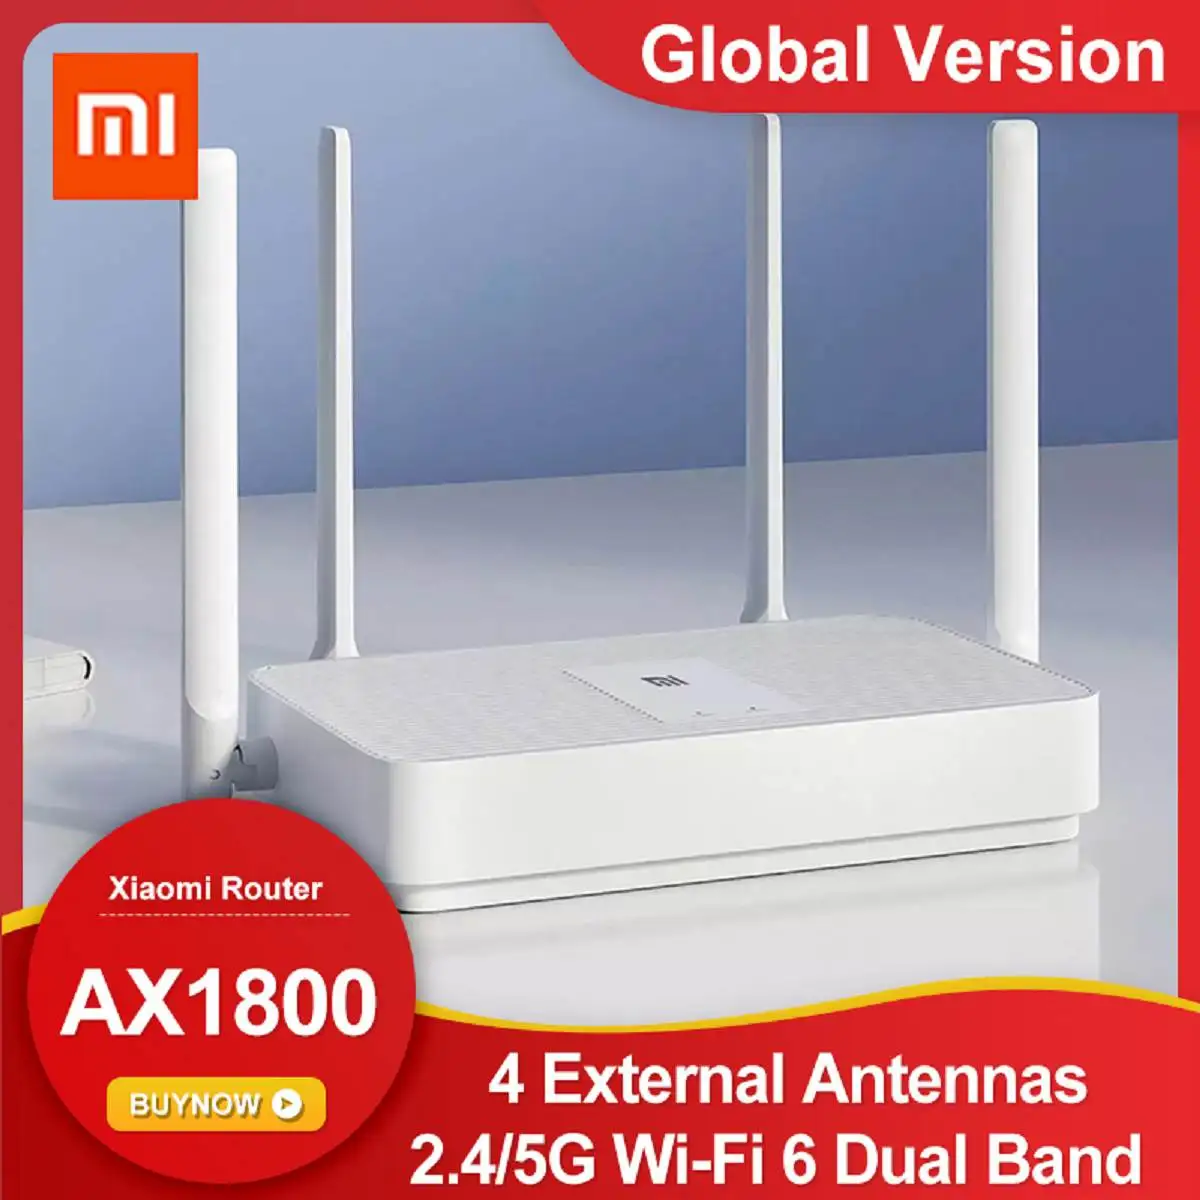 Global Version Xiaomi Router AX1800 Wi-Fi 6 Dual Band Wireless WiFi Router 5-Core Chip 4 External Antennas Signal Booster